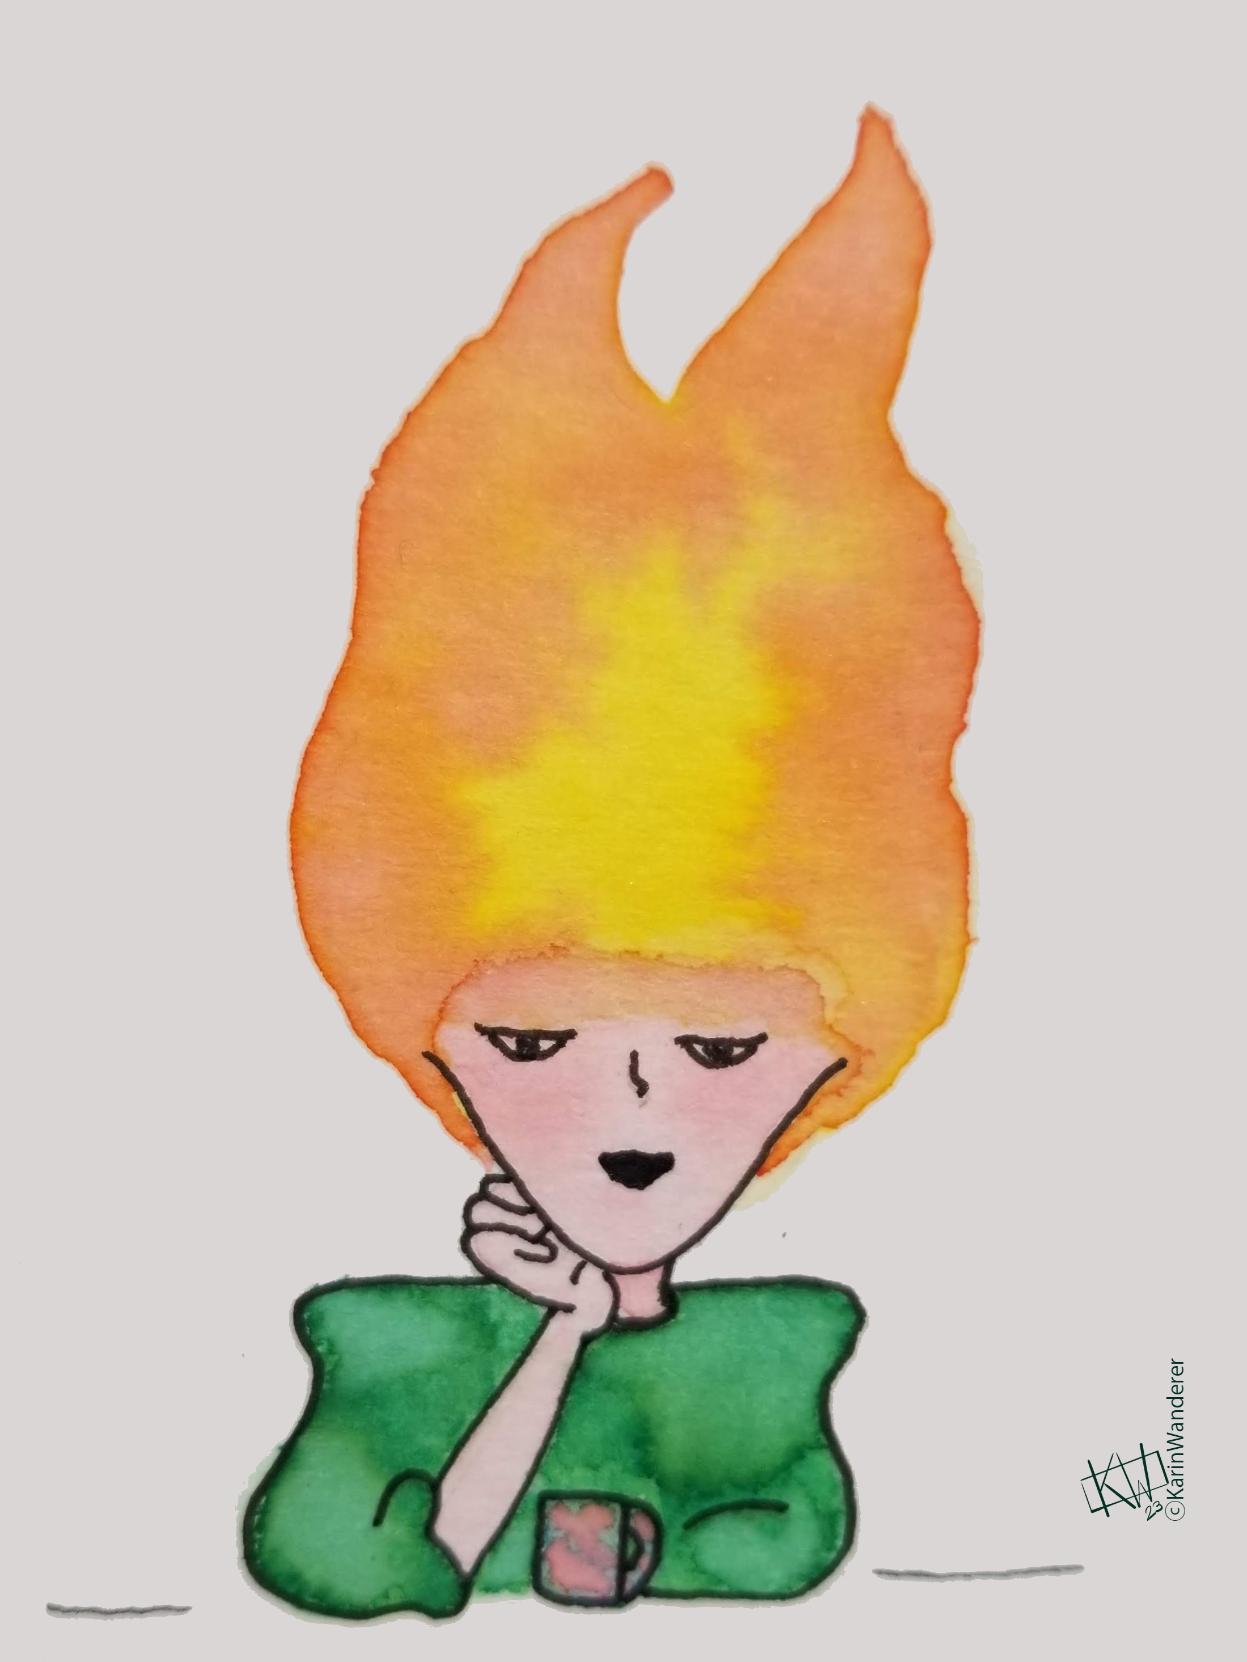 Watercolor of a woman. Her clothes are bright green & her skin is peachy-pink. She sits resting her chin on one hand while looking out at the viewer. Her head is on fire, the flames are vibrant orange & yellow.